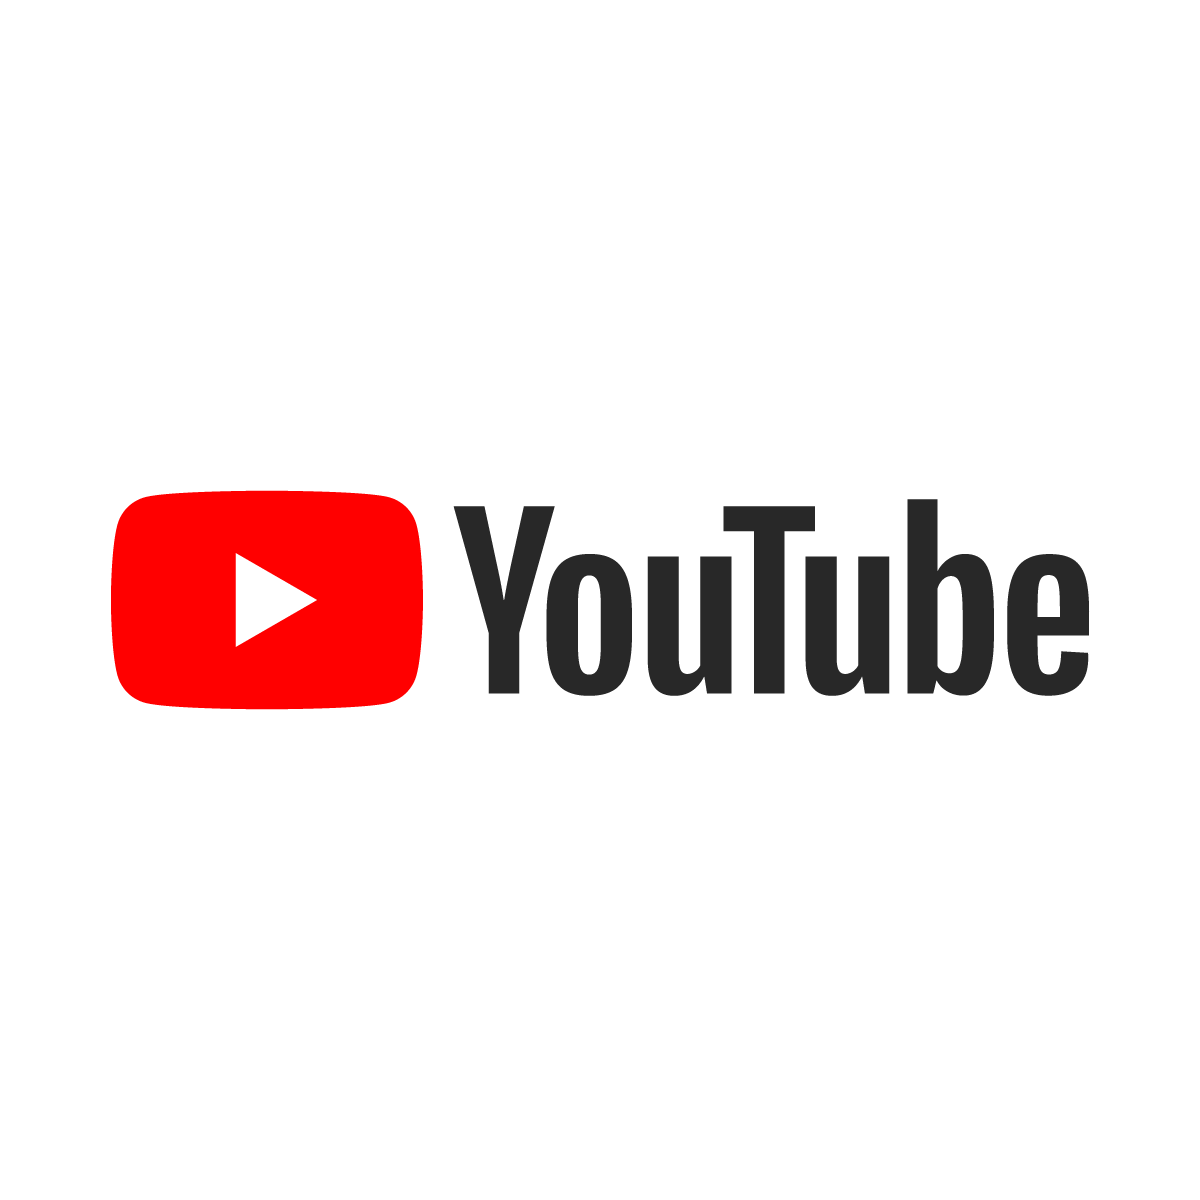 youtube - promote your business for free